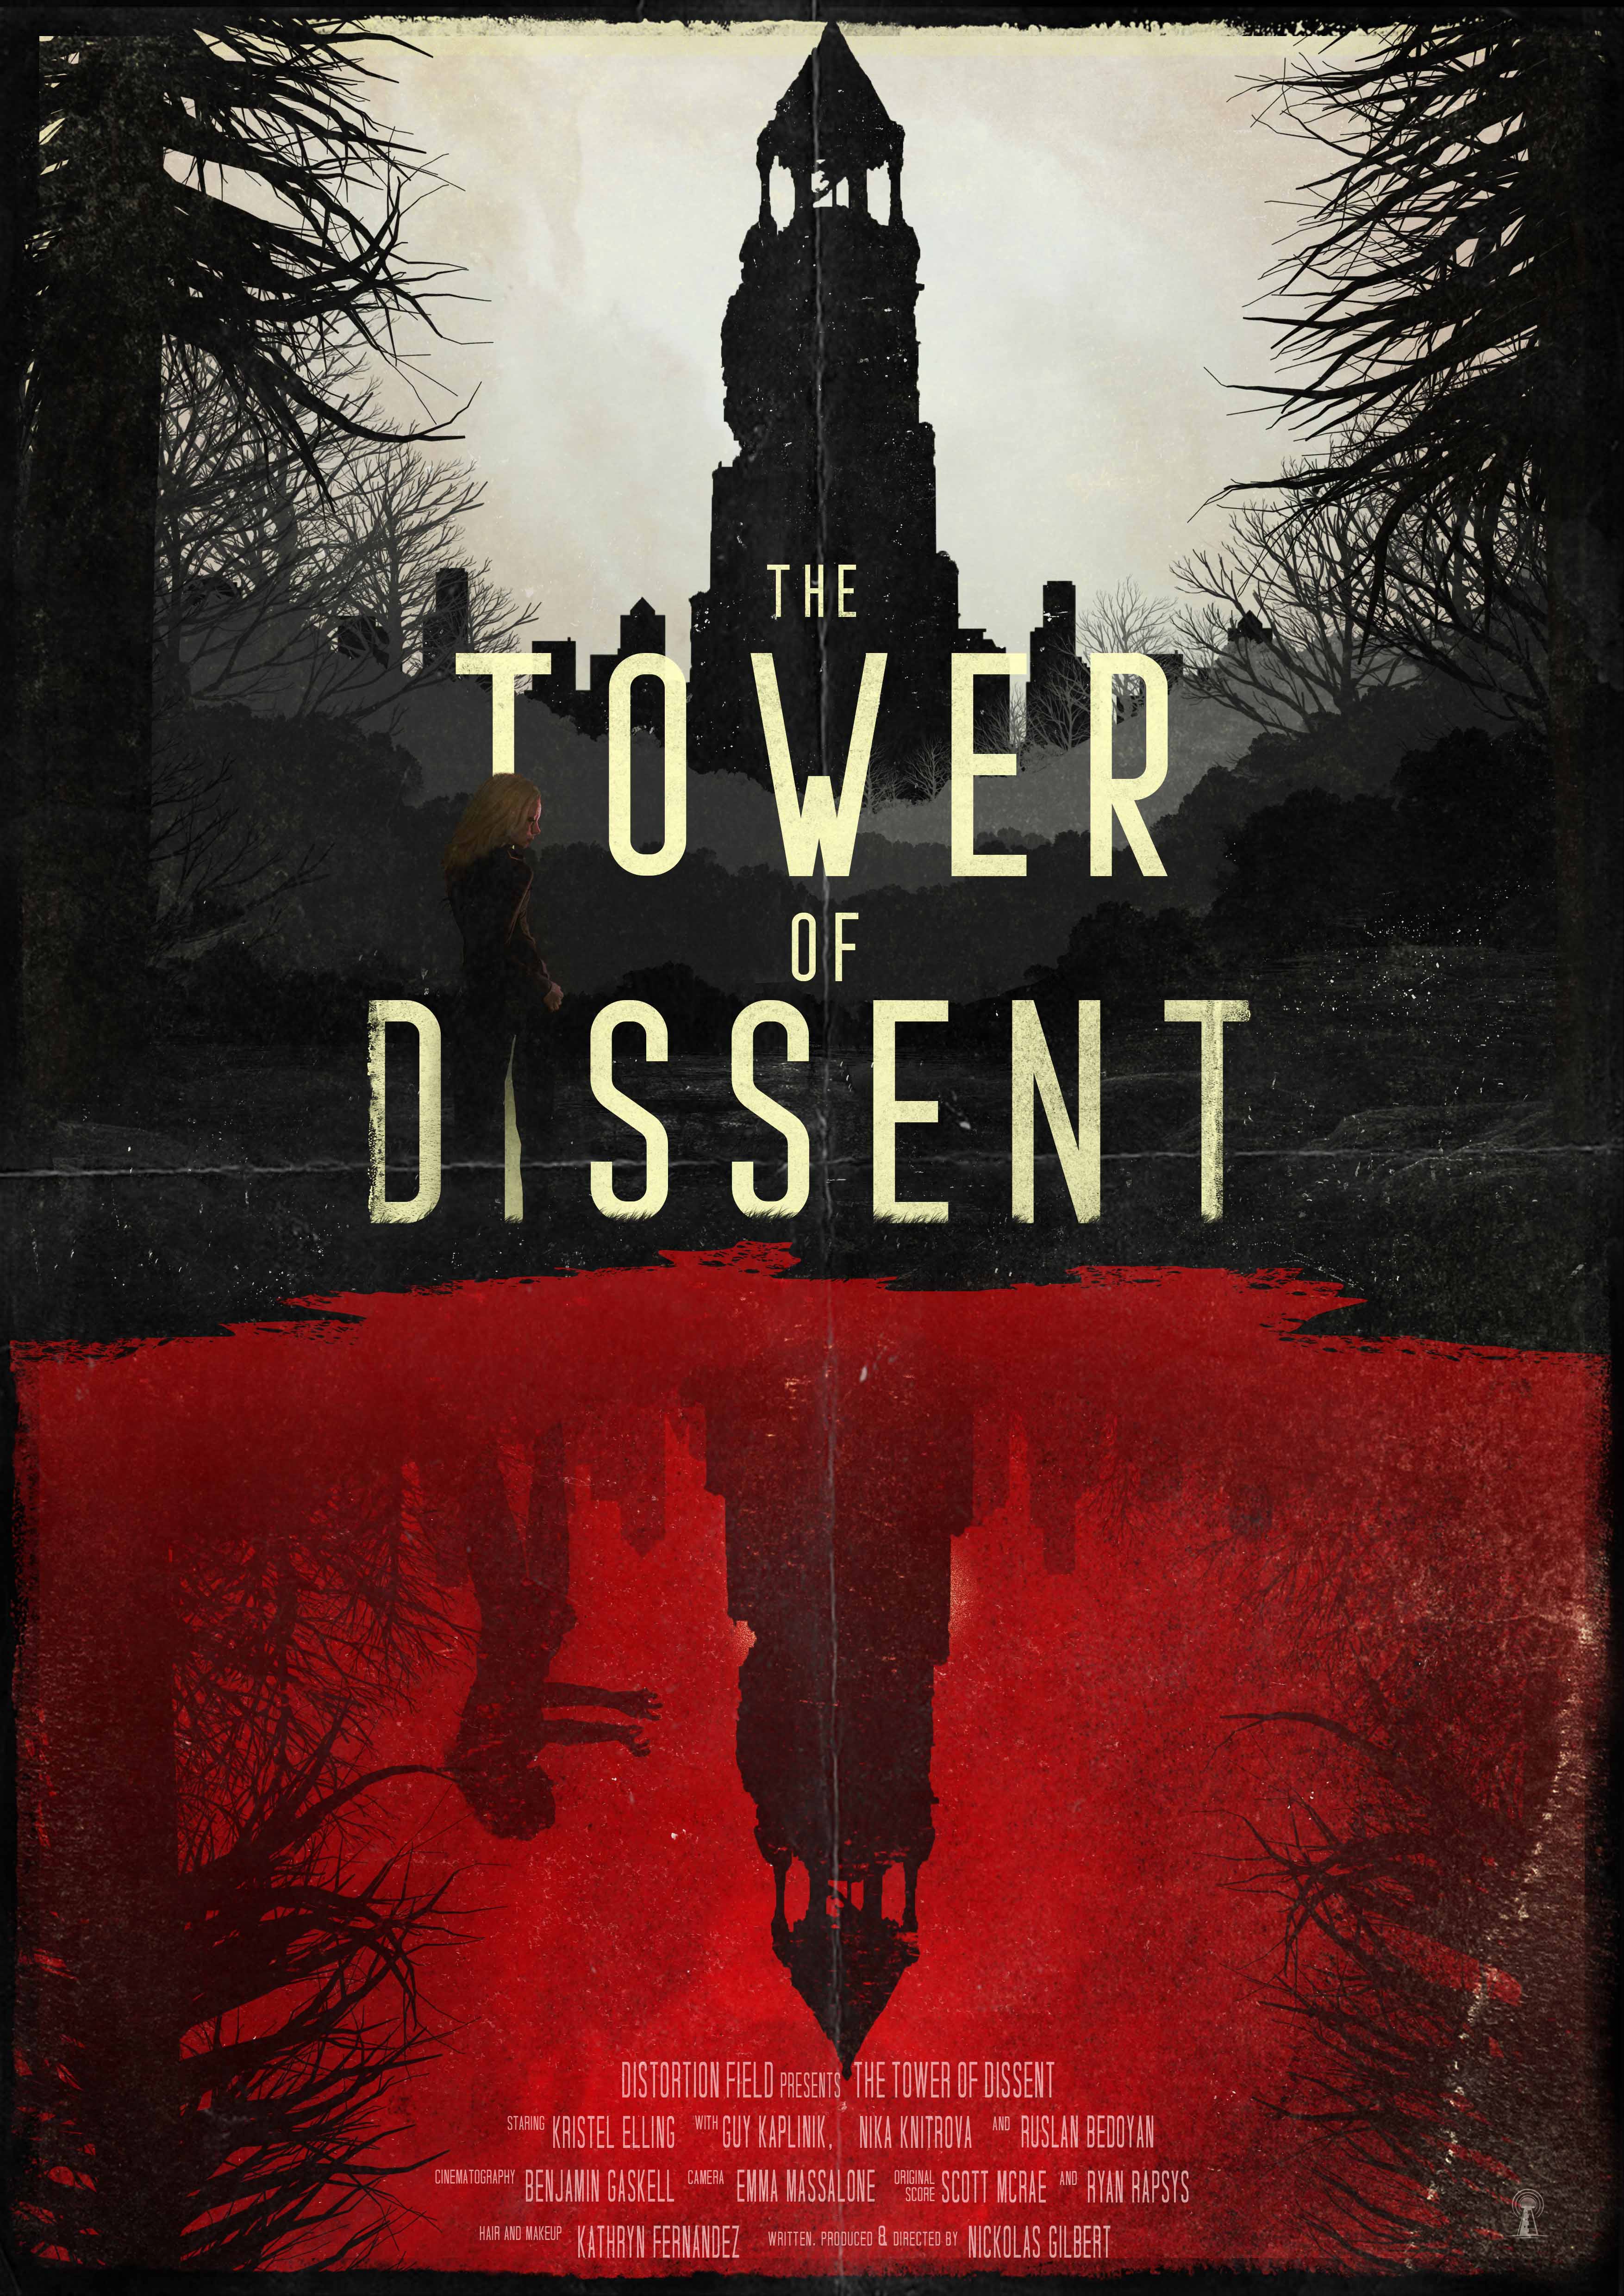 The Tower of Dissent